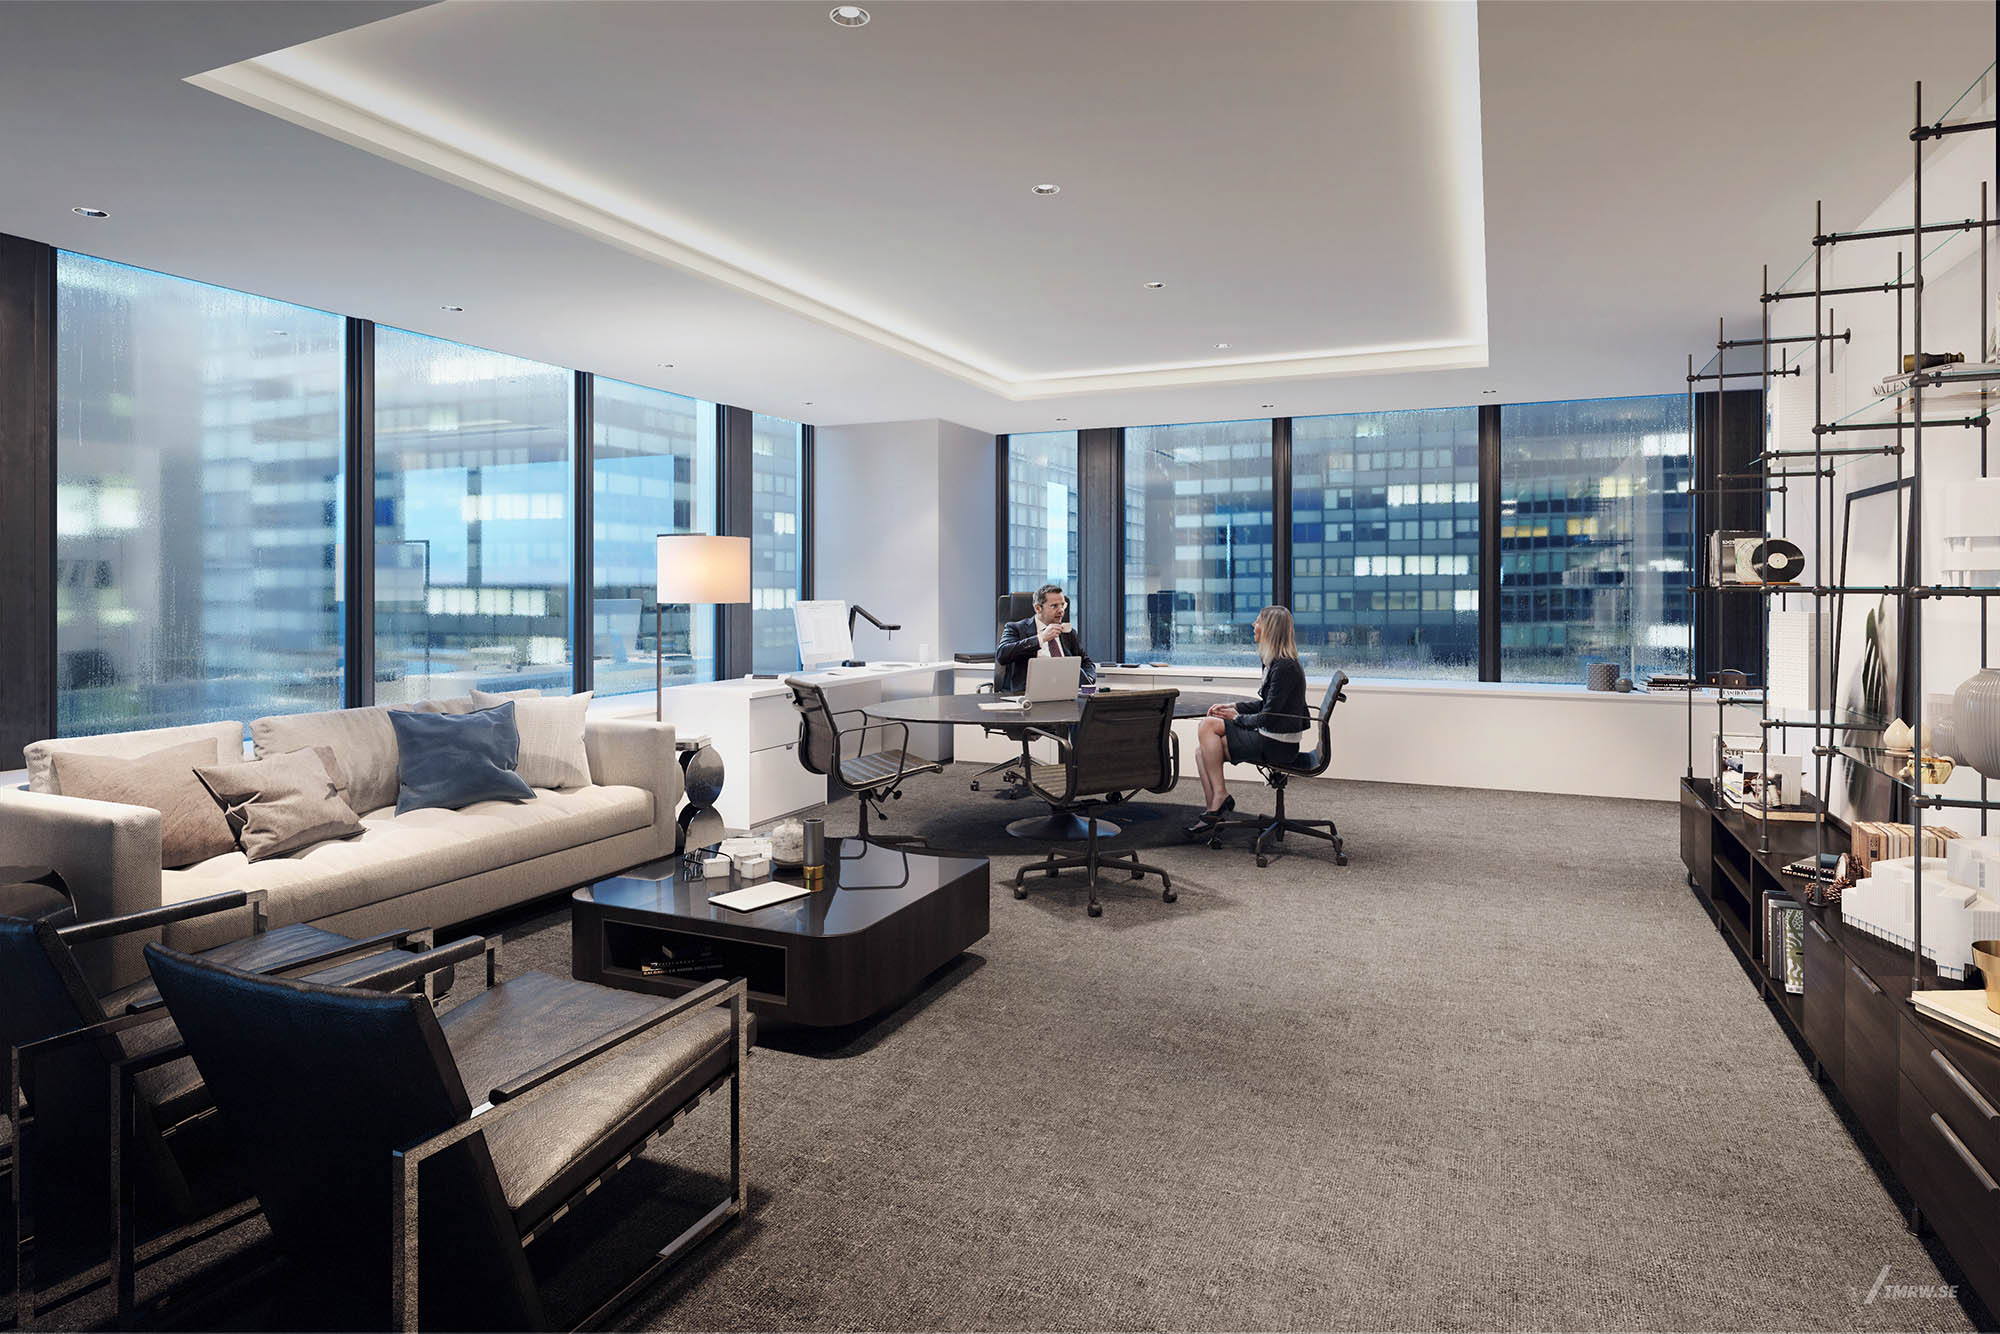 Architectural visualization of Paramount for Gensler, an office view in day light from a interior view.